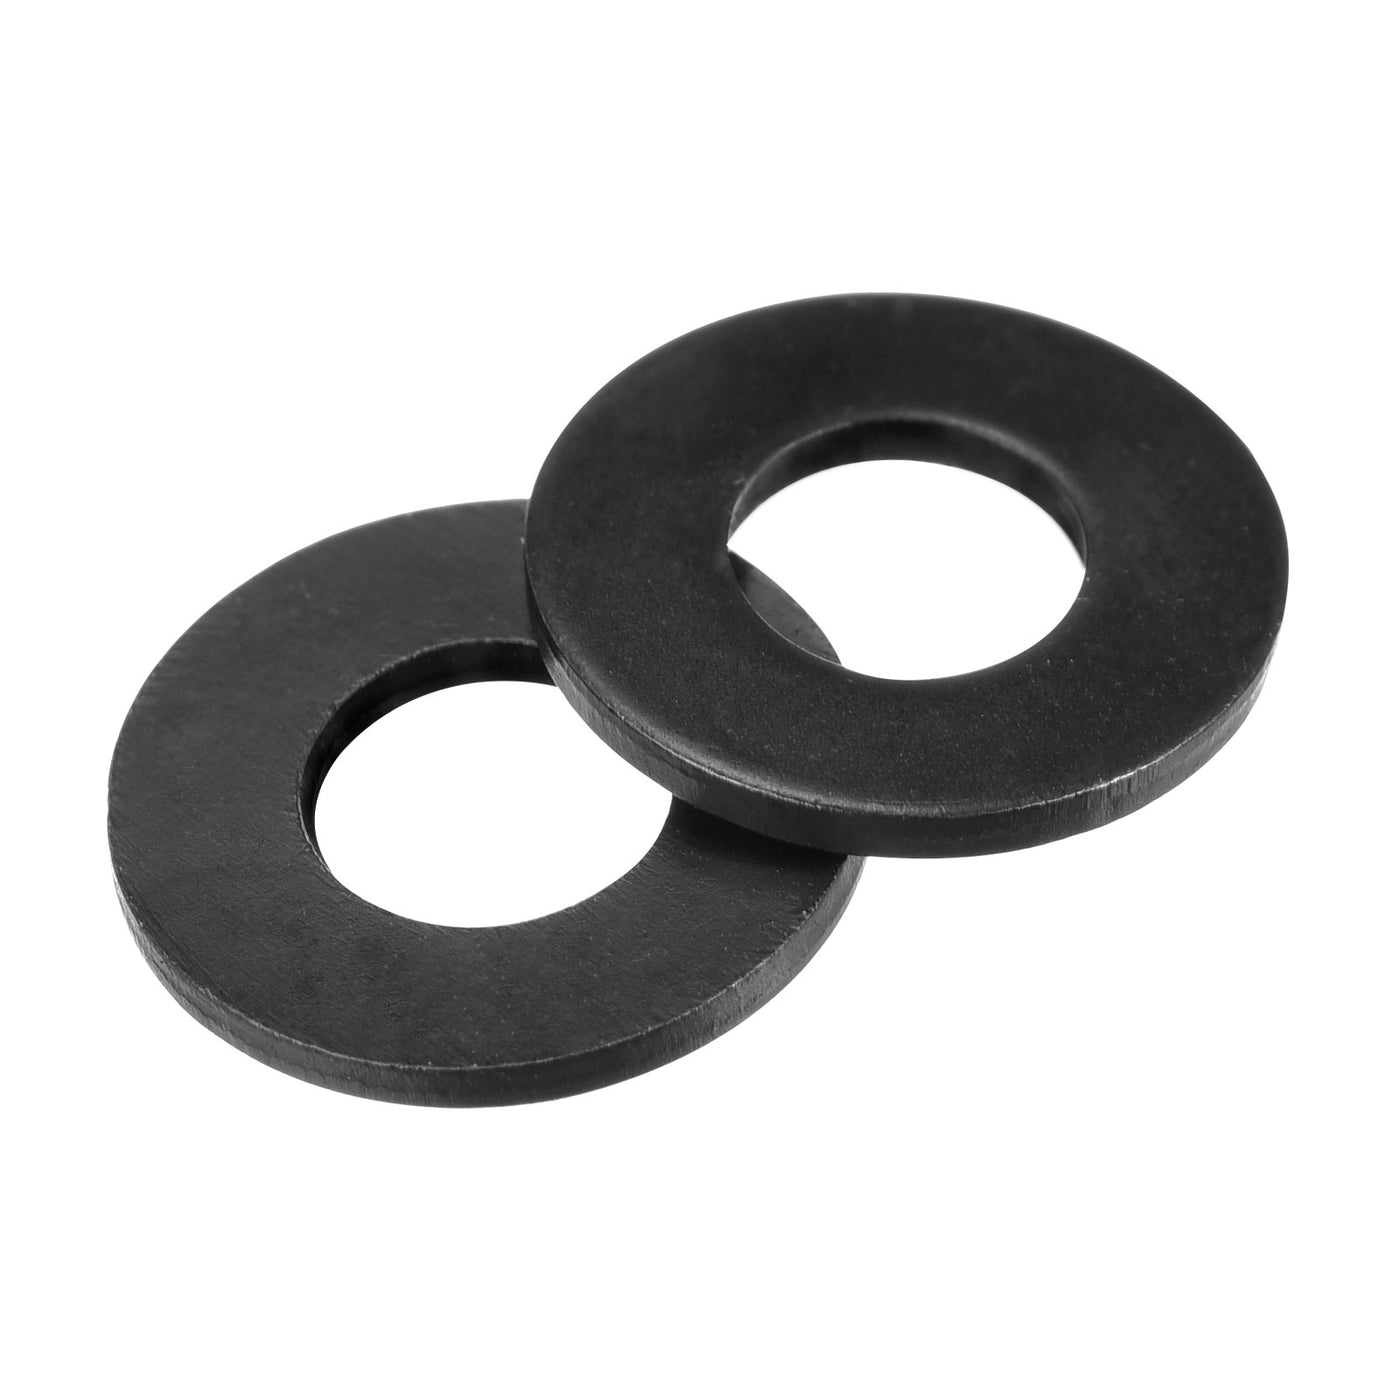 uxcell Uxcell 1/4-Inch Flat Washer, Alloy Steel Black Oxide Finish Pack of 50